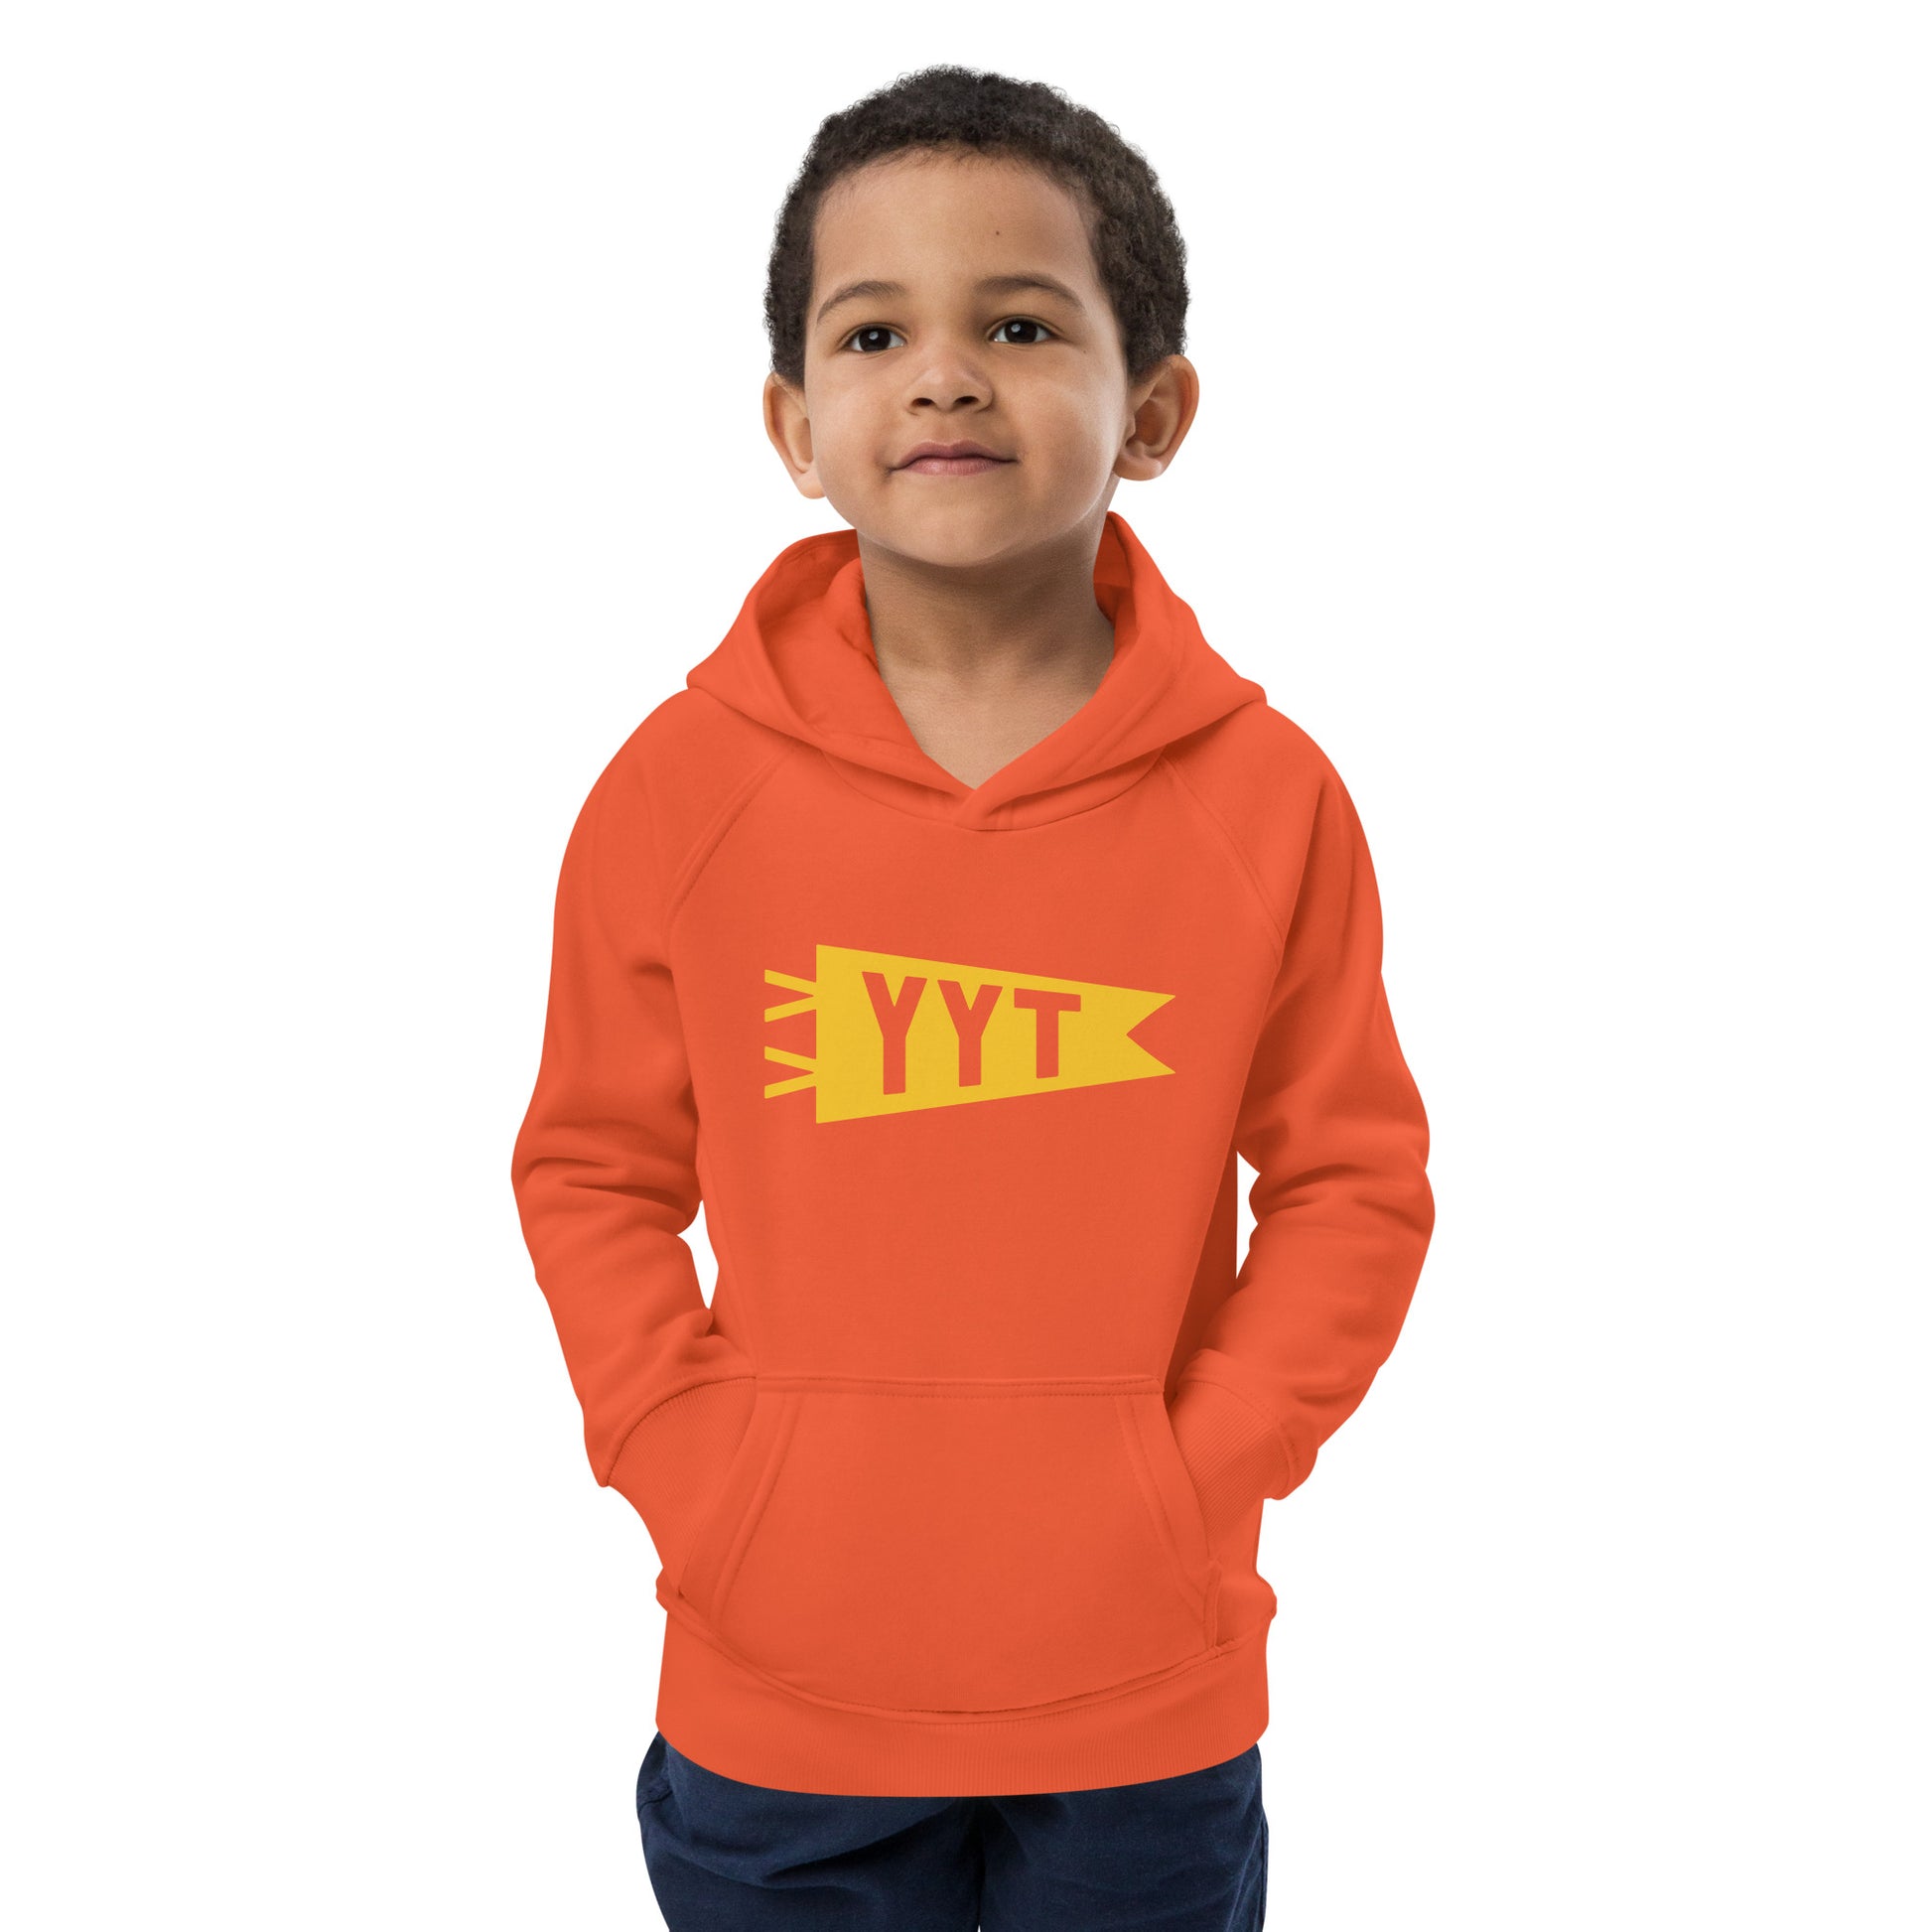 Kid's Sustainable Hoodie - Yellow Graphic • YYT St. John's • YHM Designs - Image 11